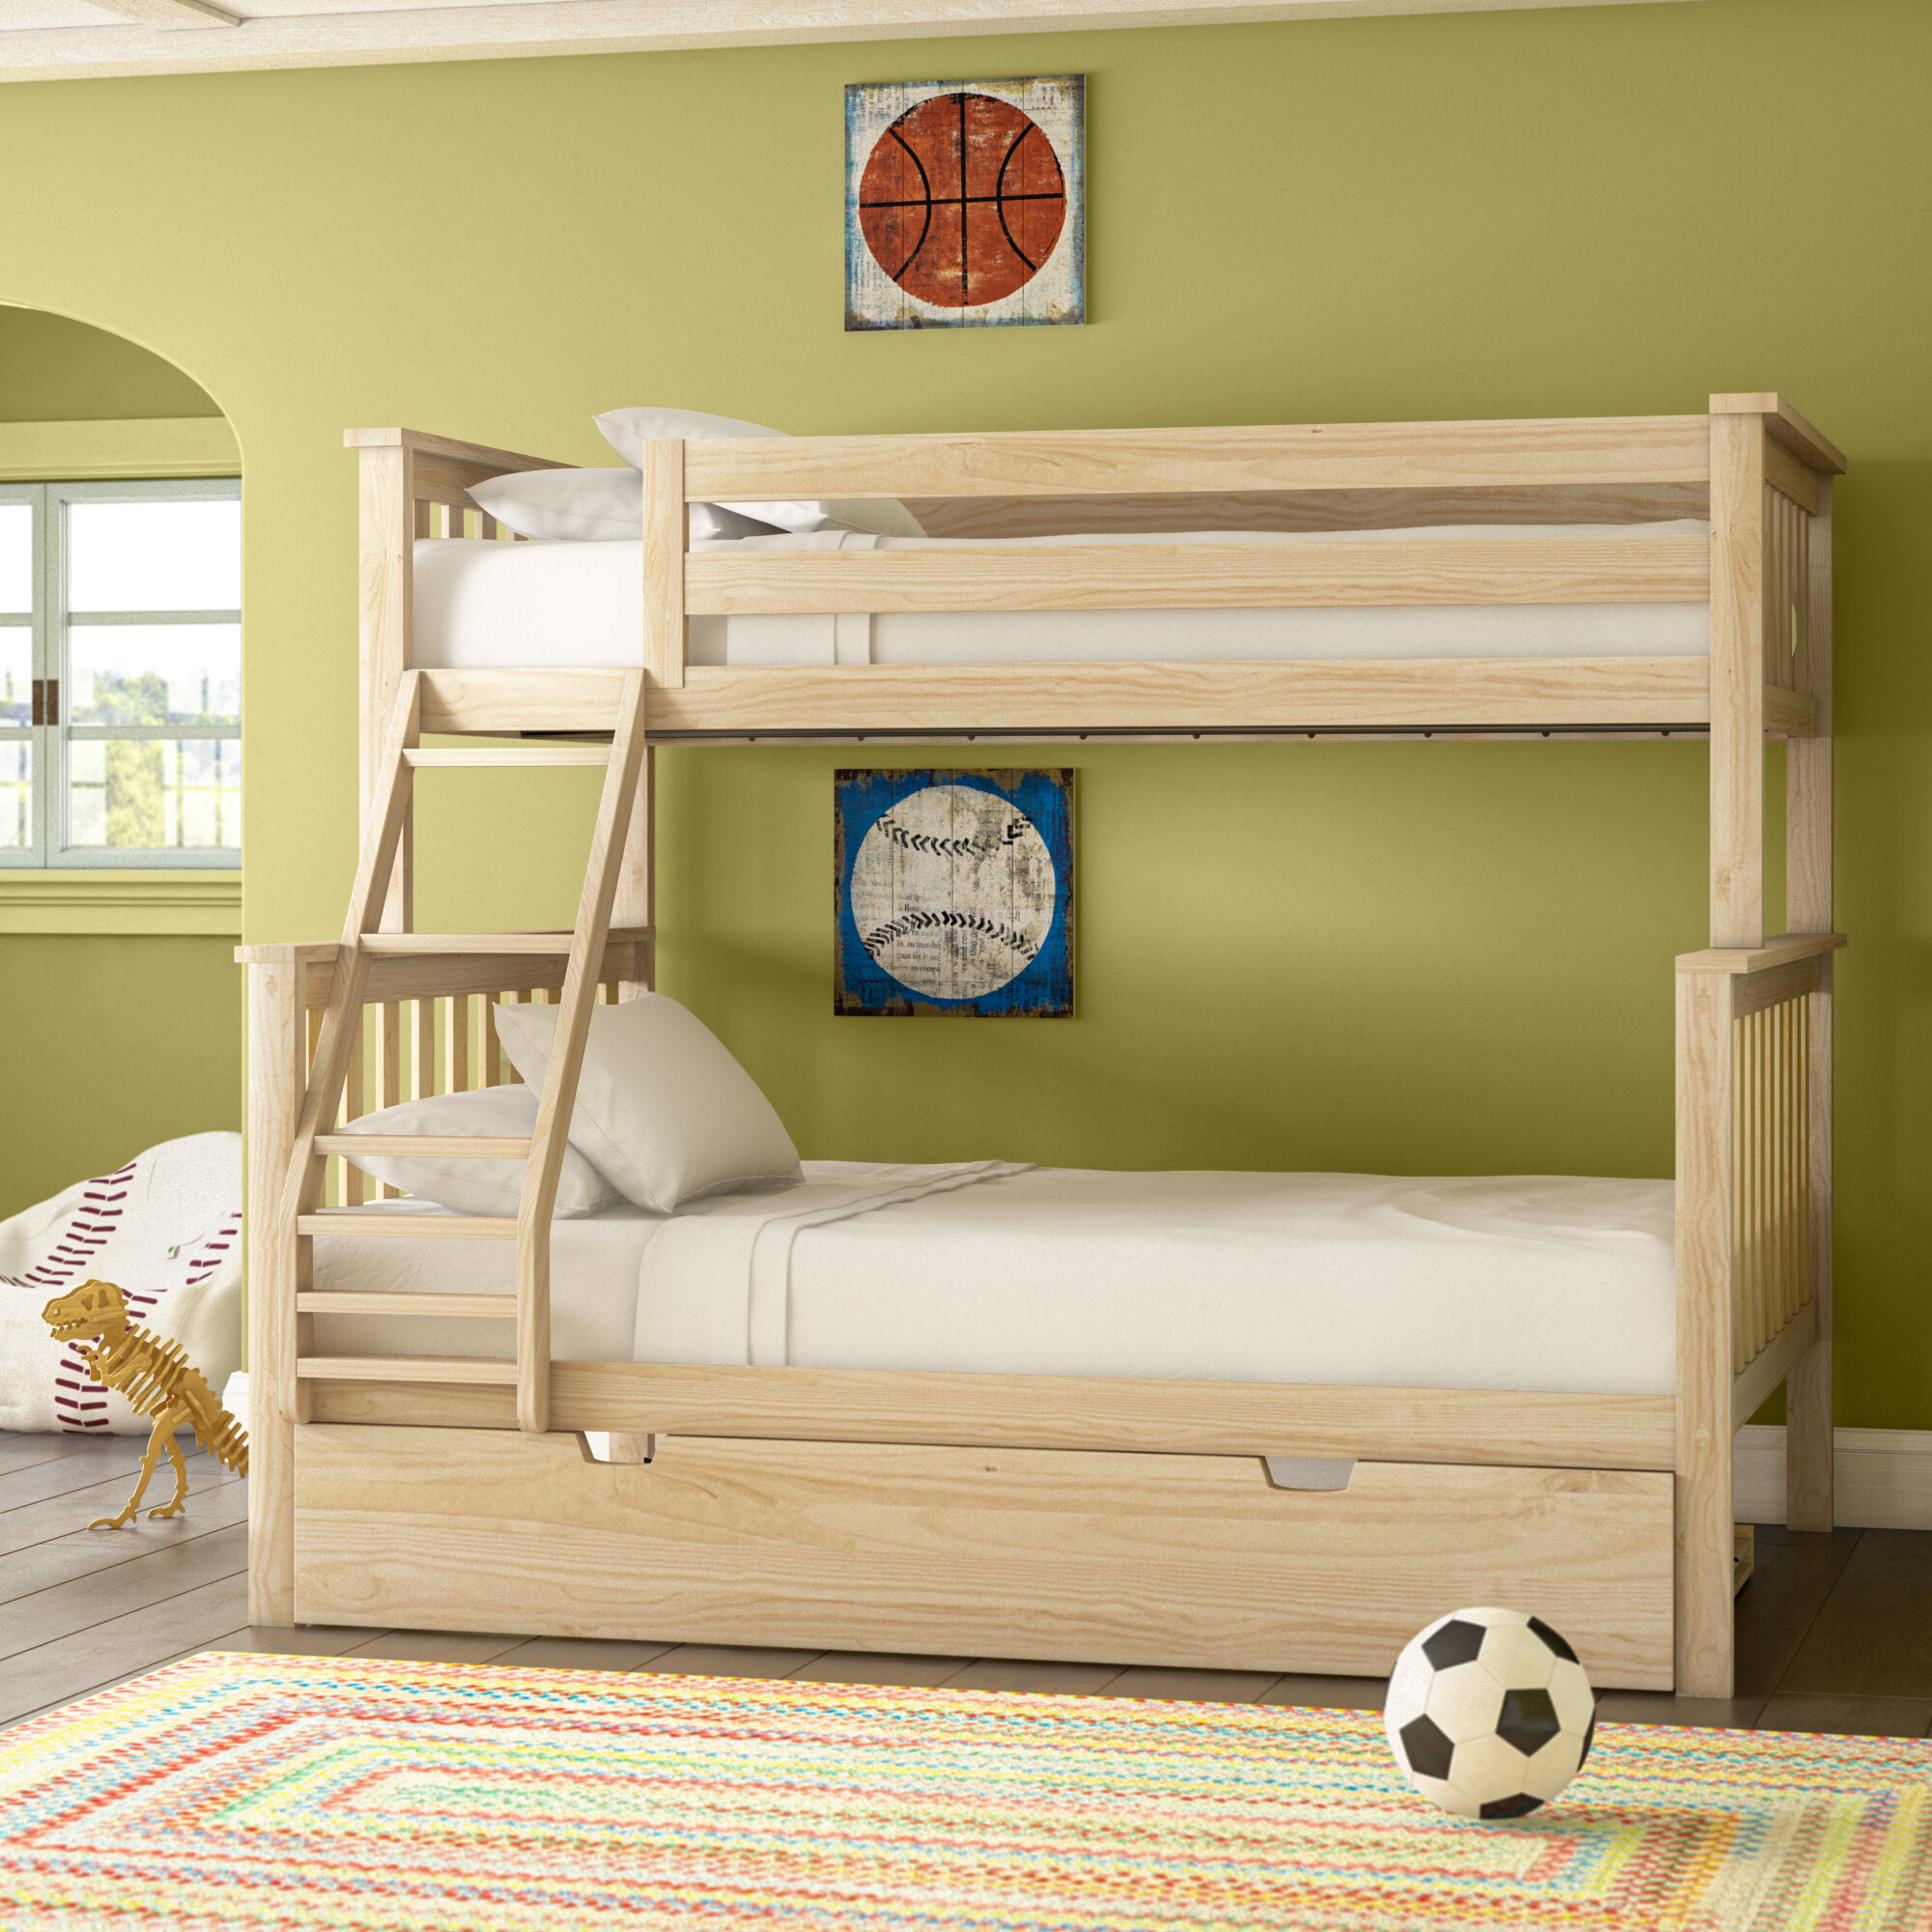 Solid Wood Slatted Bed Base Kid's Teen's Single Double Size Bedroom Living Room